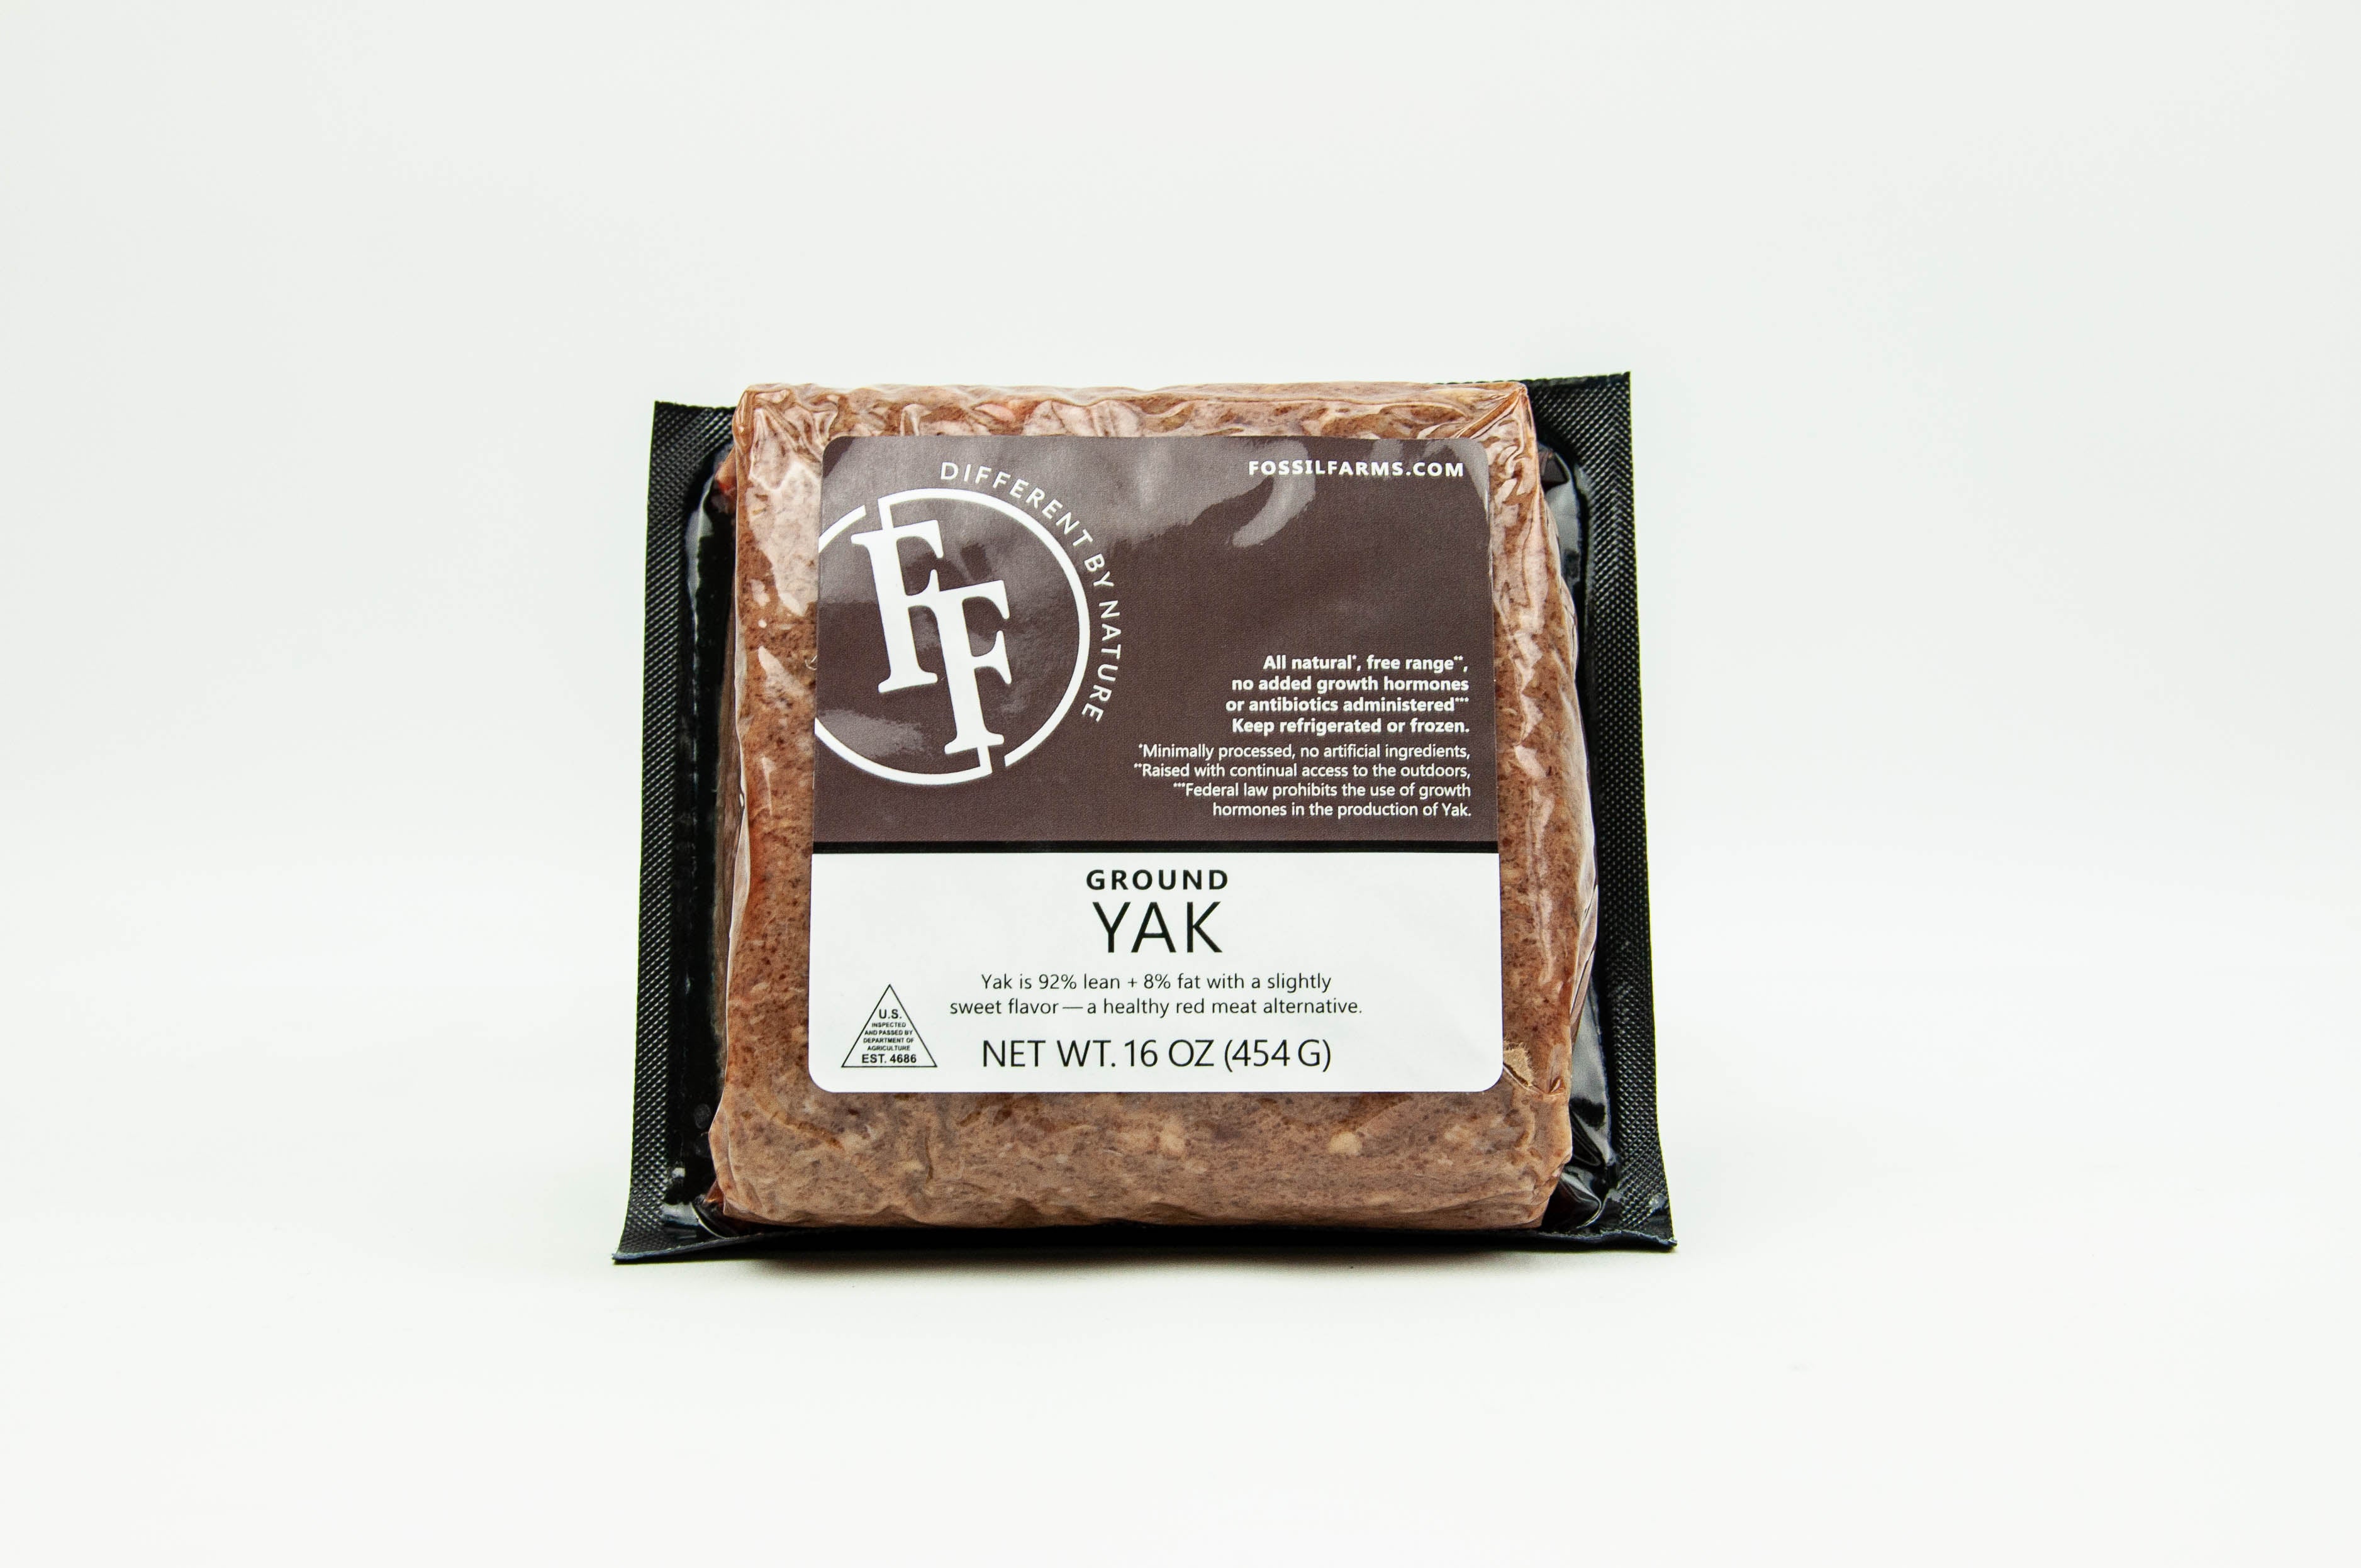 Ground Yak Meat packaged